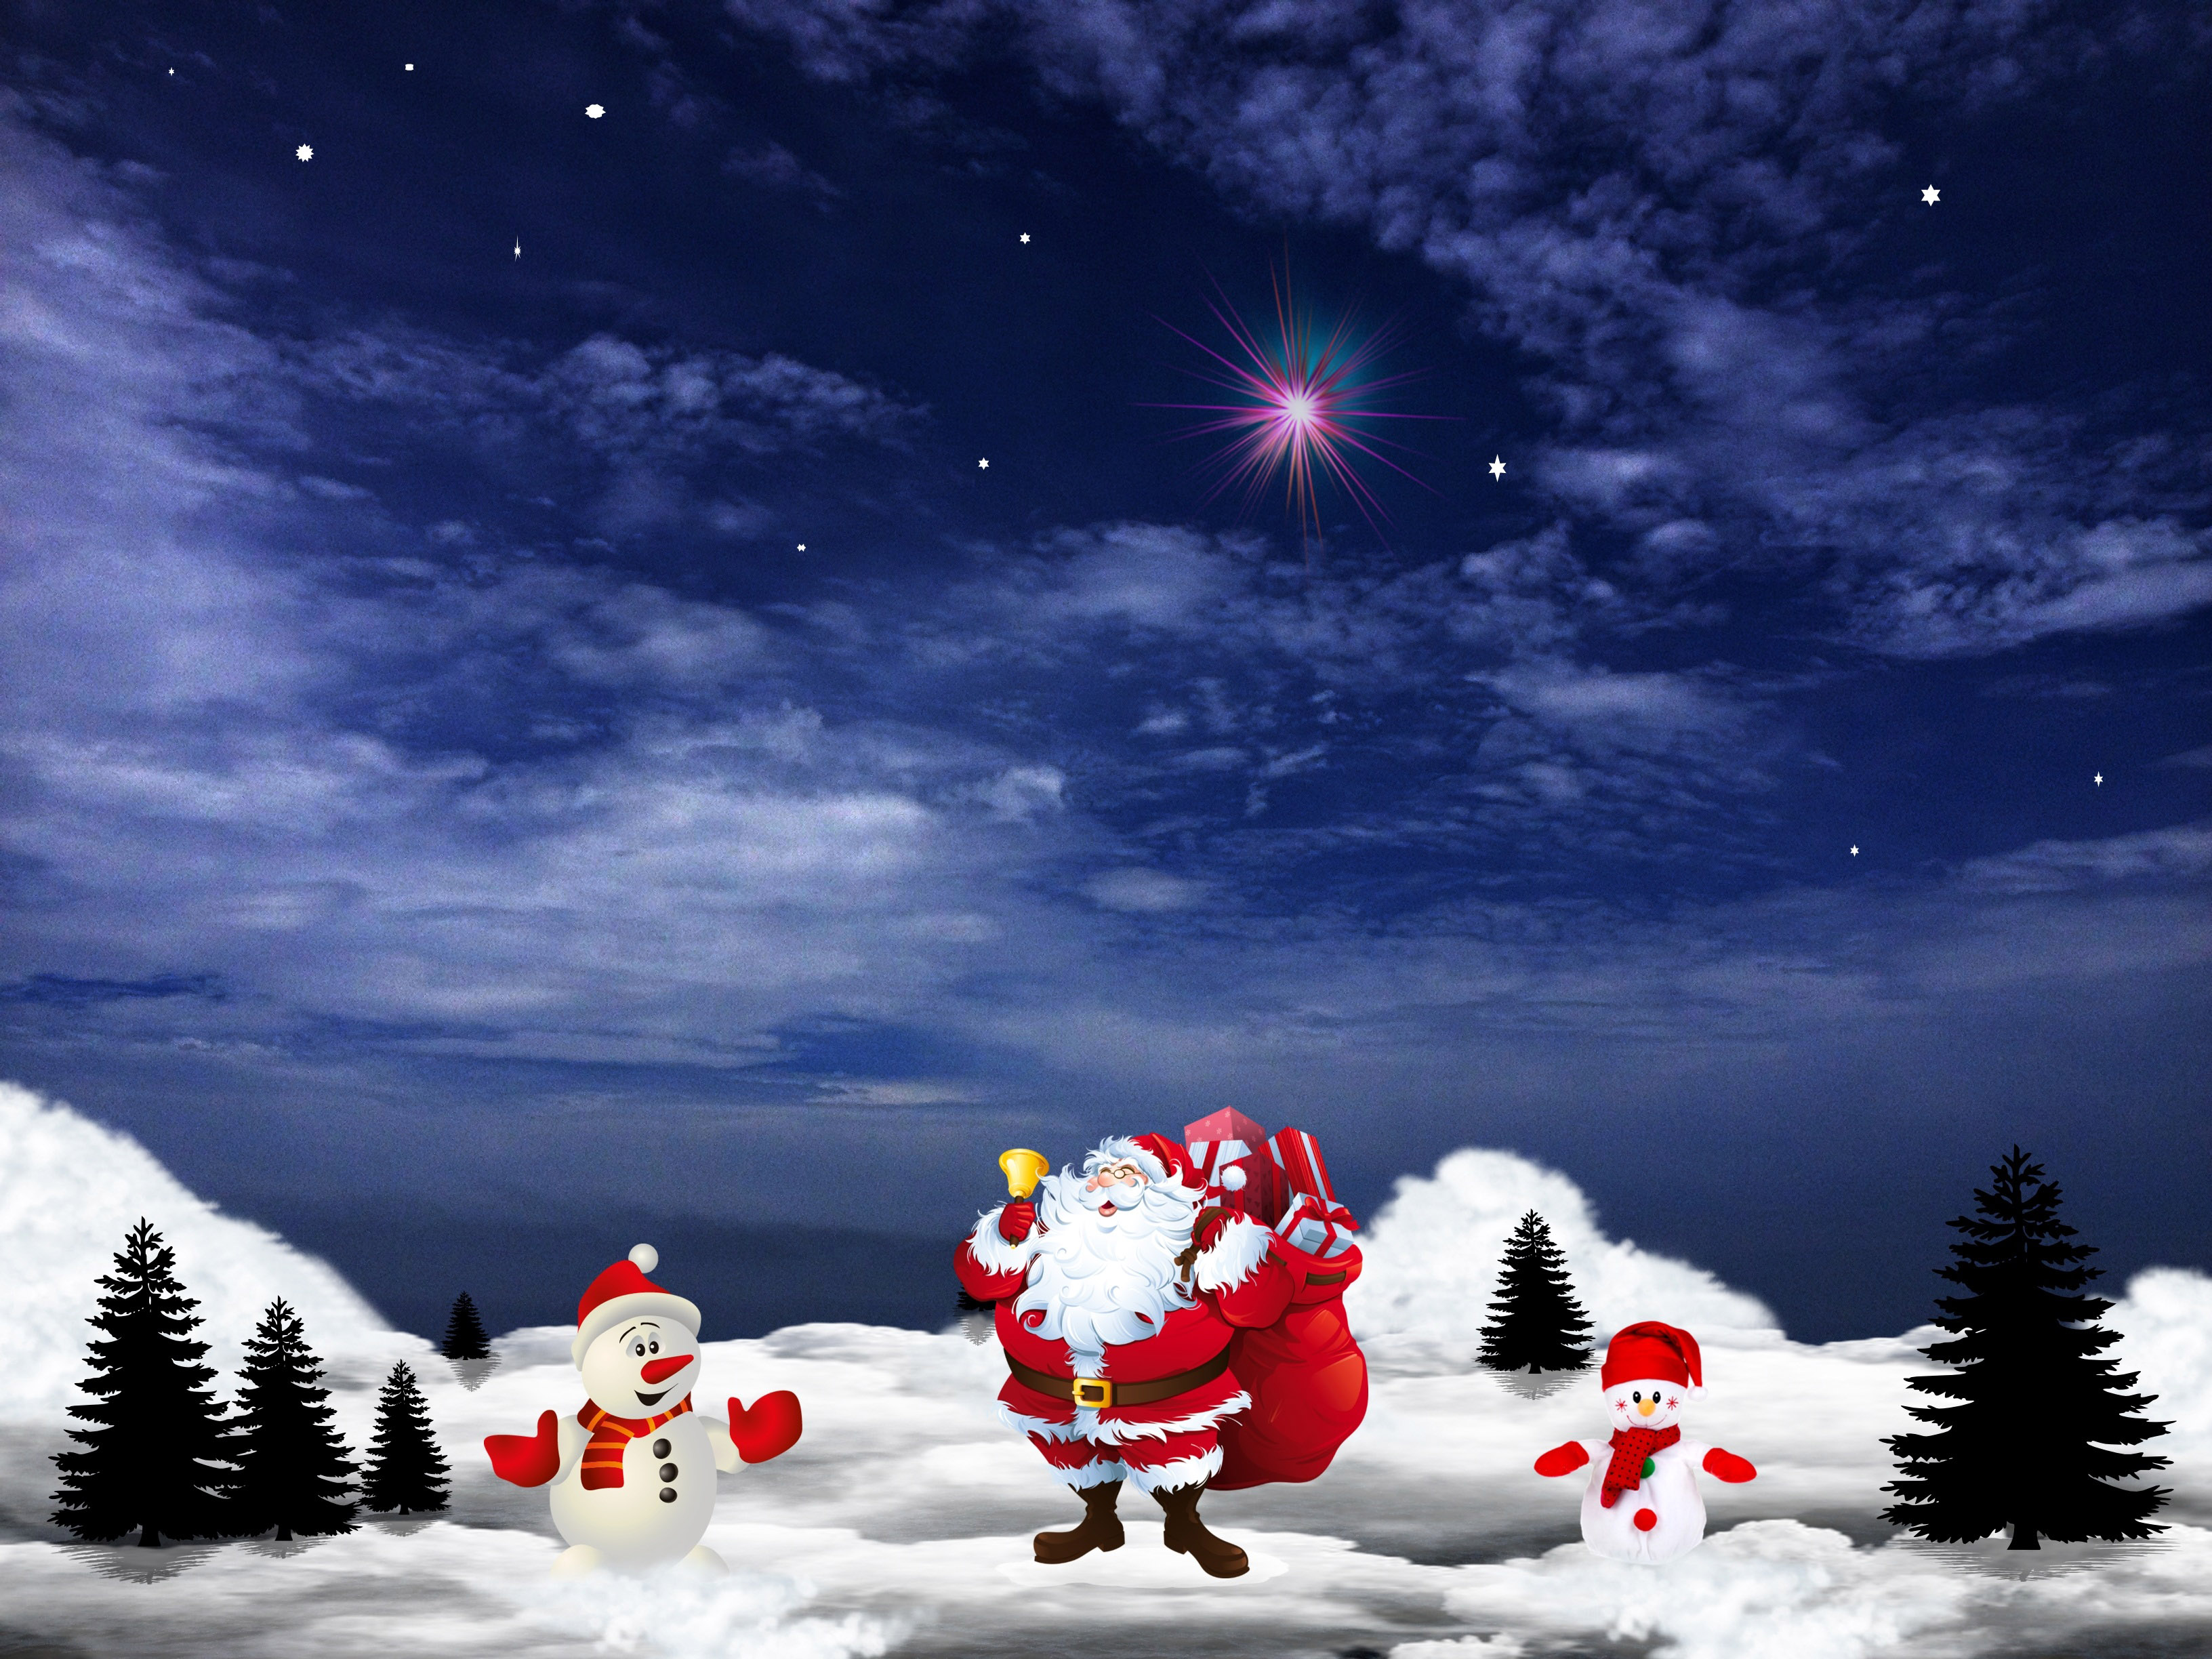 Santa Claus and two snowmen on Christmas Eve image Free stock photo